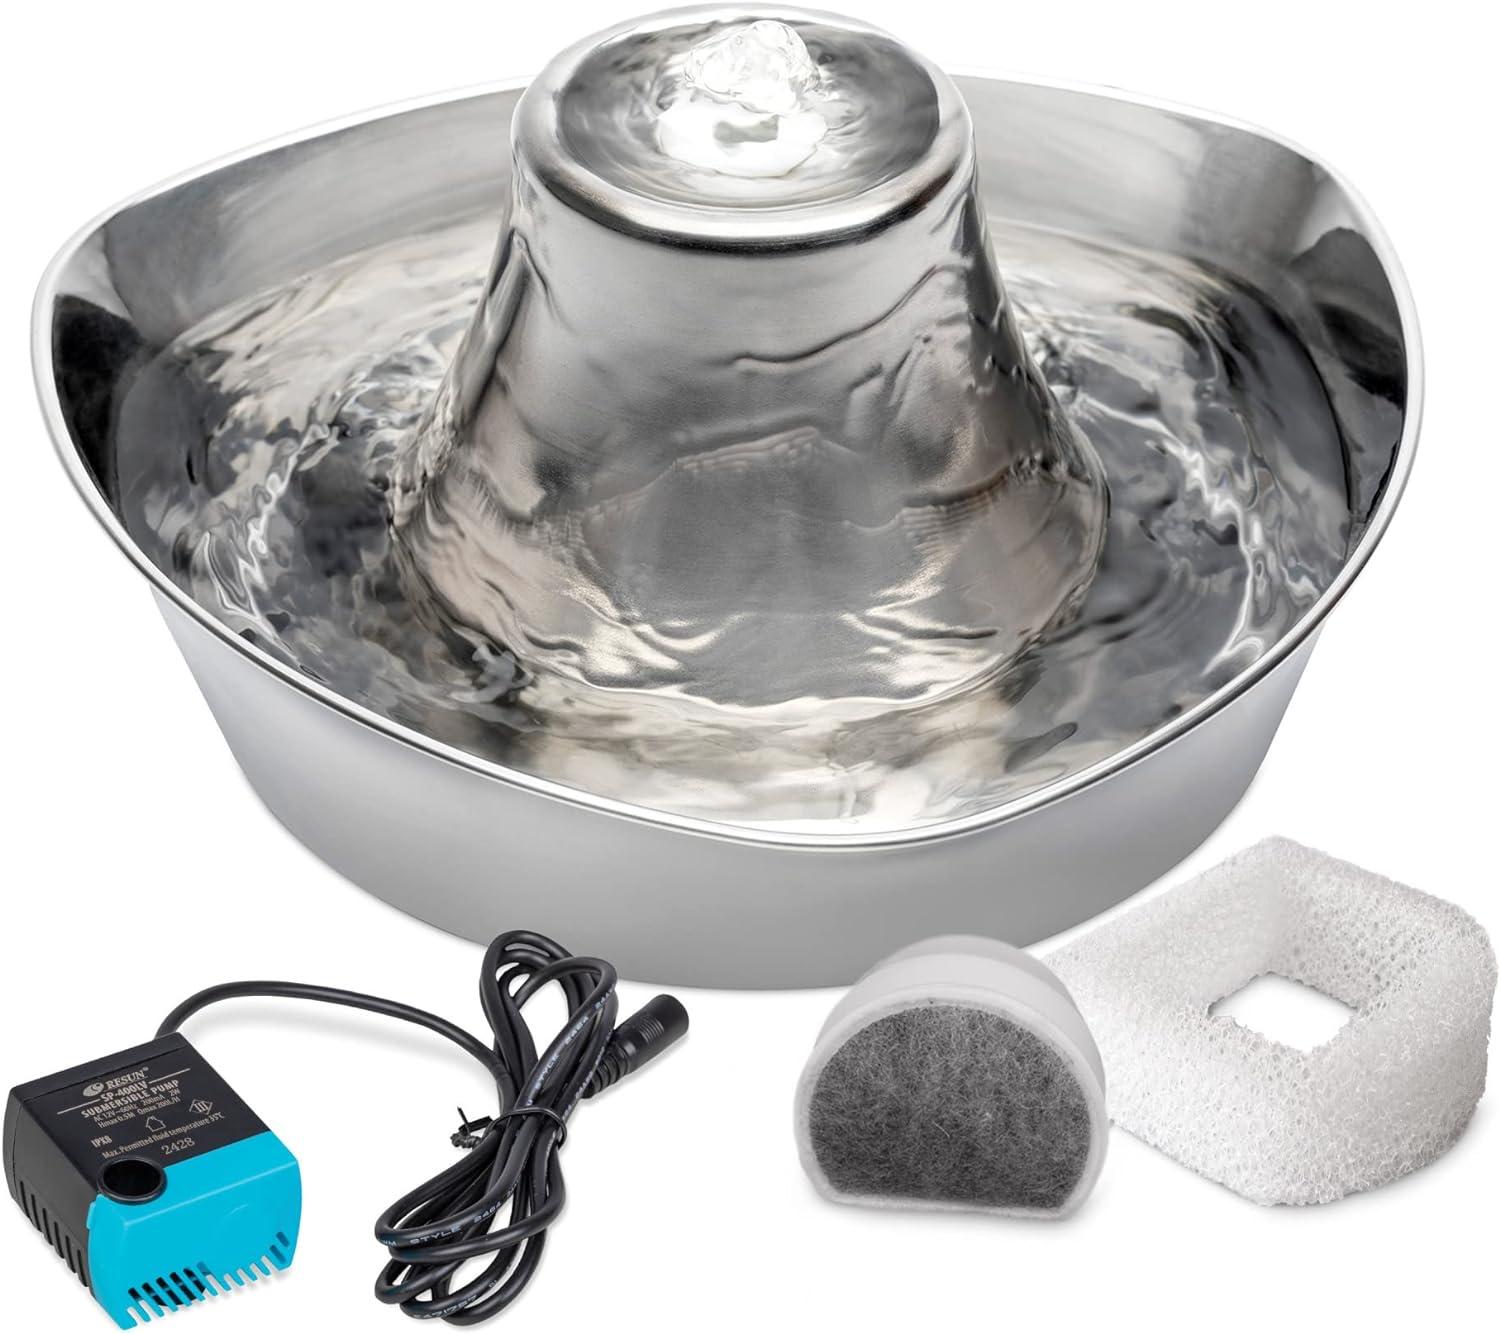 PetSafe Seaside Stainless Steel Cat and Dog Fountain for $25.77 Shipped